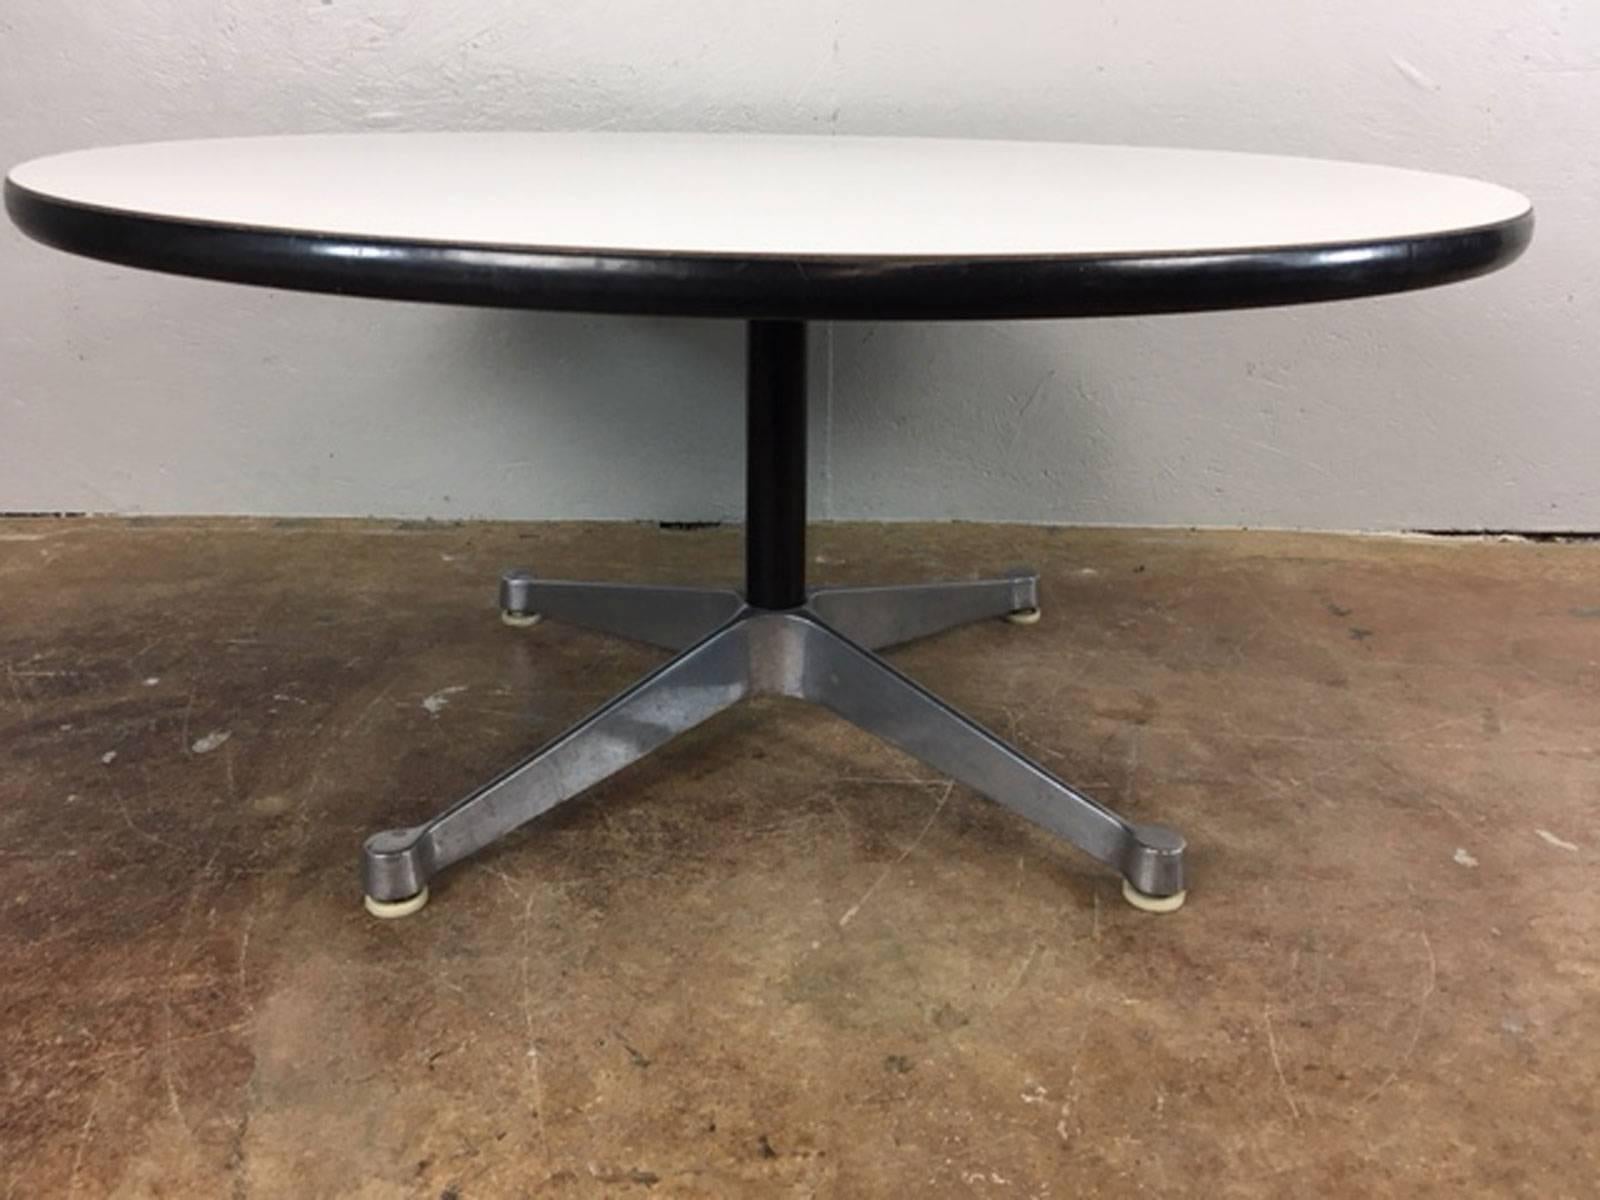 This 1960s Herman Miller Mid-Century Modern coffee table features a white formica surface with black trim, and steel pedestal legs.